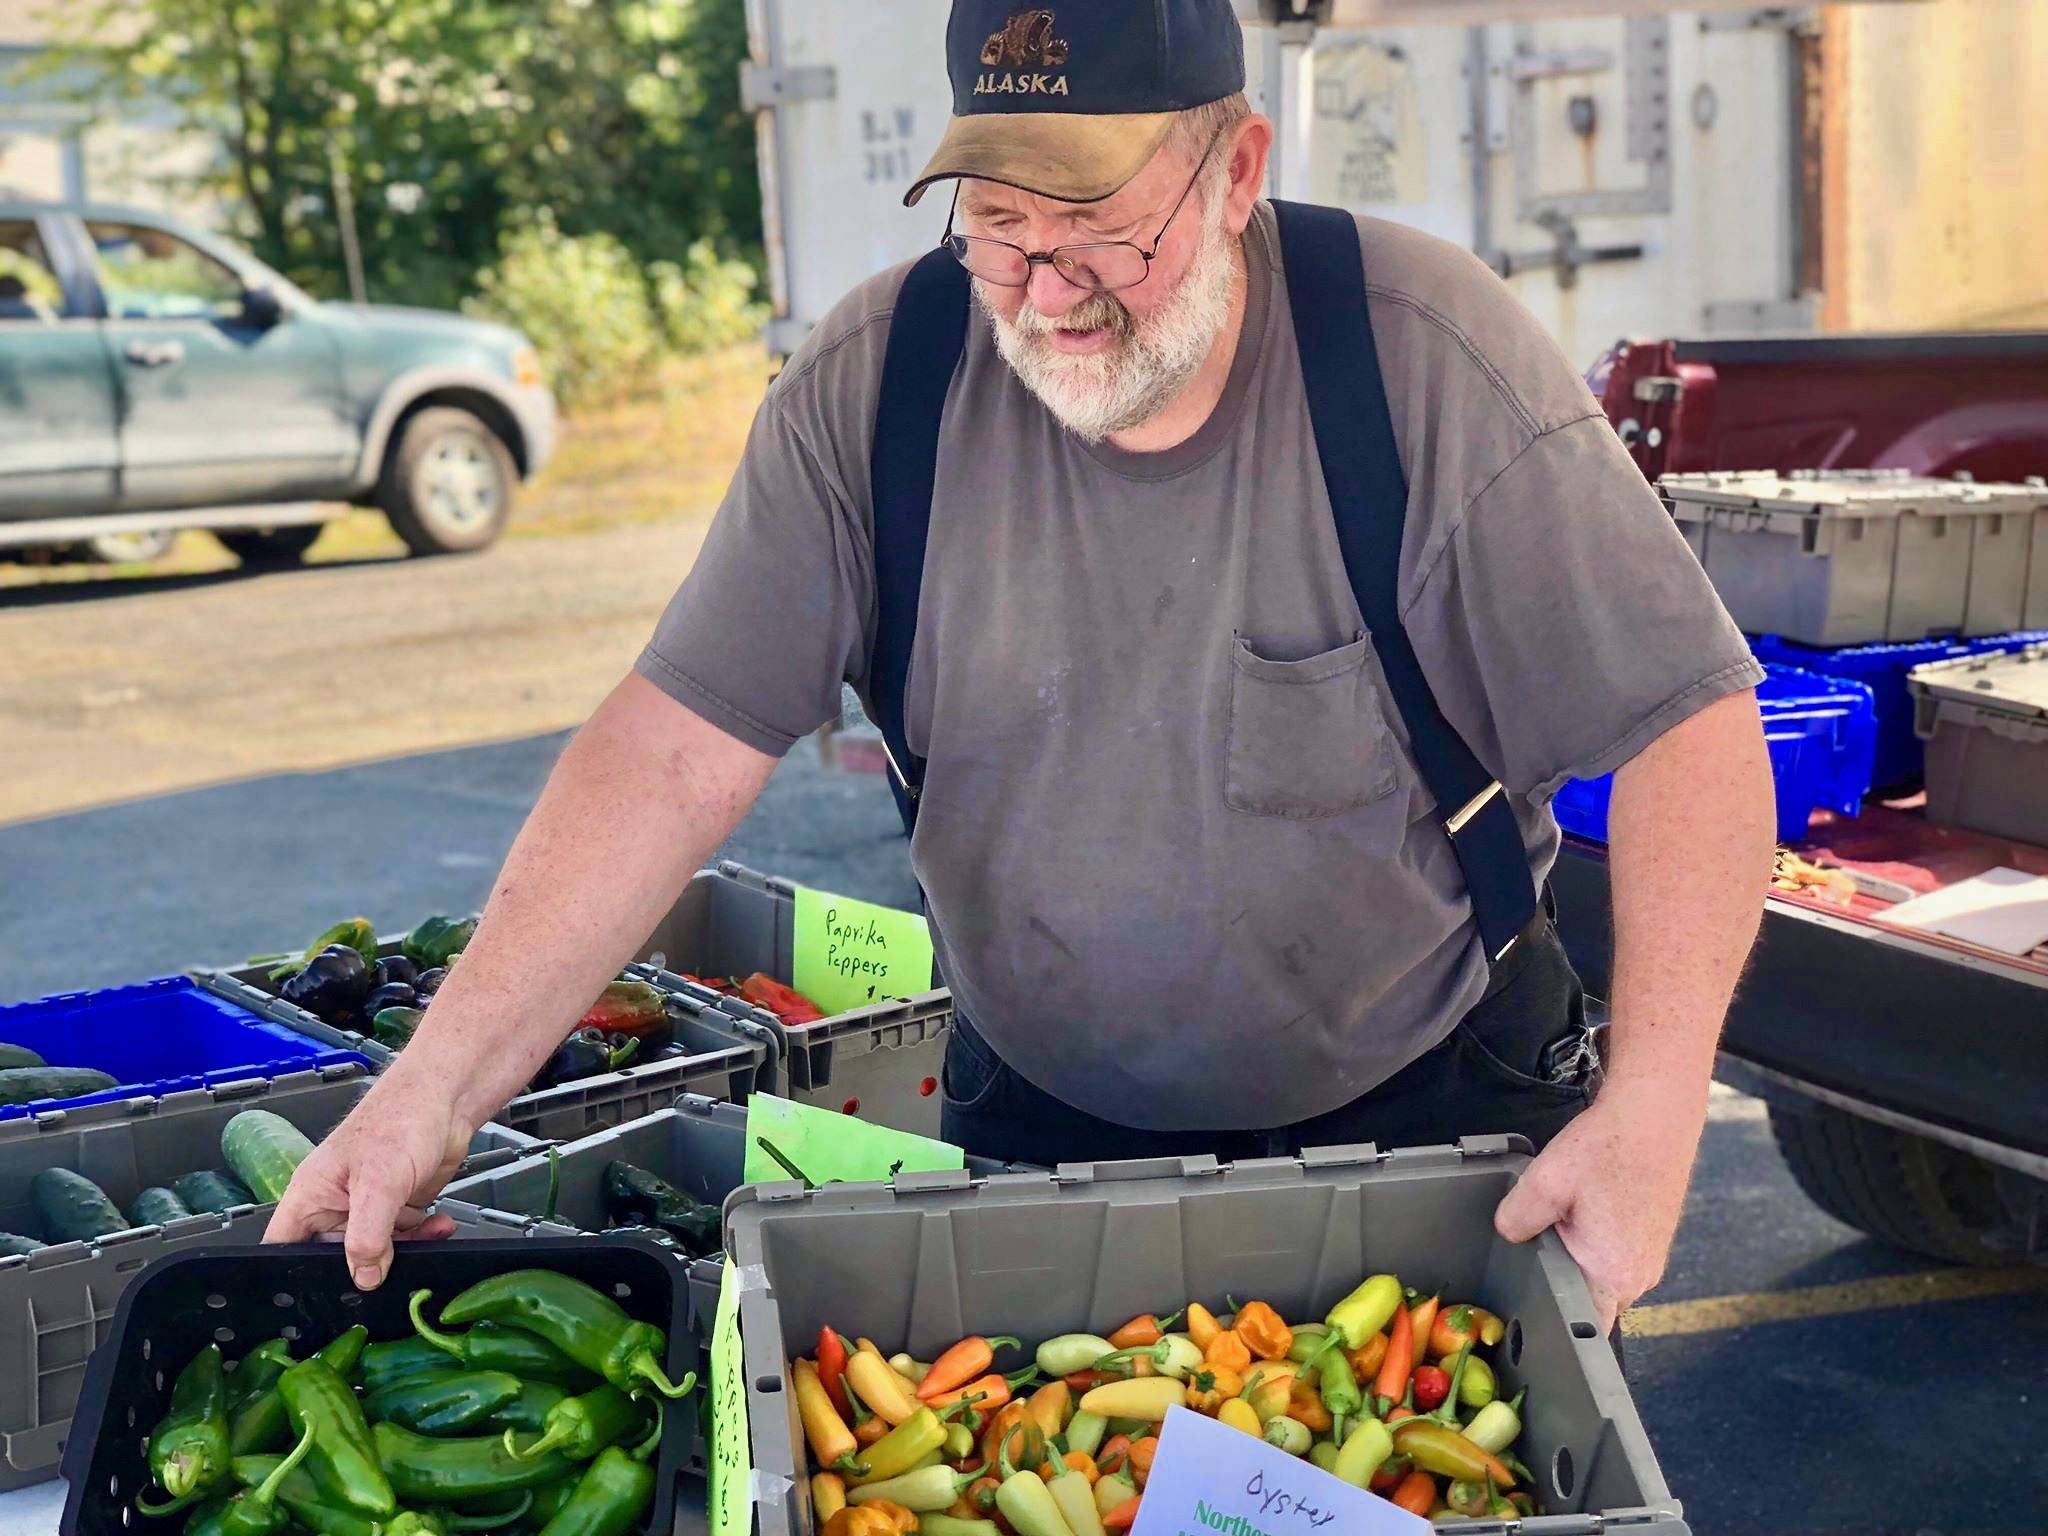 Dan Bilyeu of Northern Lights Mushrooms sells oyster mushrooms and a large variety of peppers, including scotch bonnets, jalapenos, poblanos and more at the Tuesday, Aug. 28, 2018 Farmers Fresh Market at the Kenai Peninsula Food Bank, near Soldotna, Alaska. (Photo by Victoria Petersen/Peninsula Clarion)